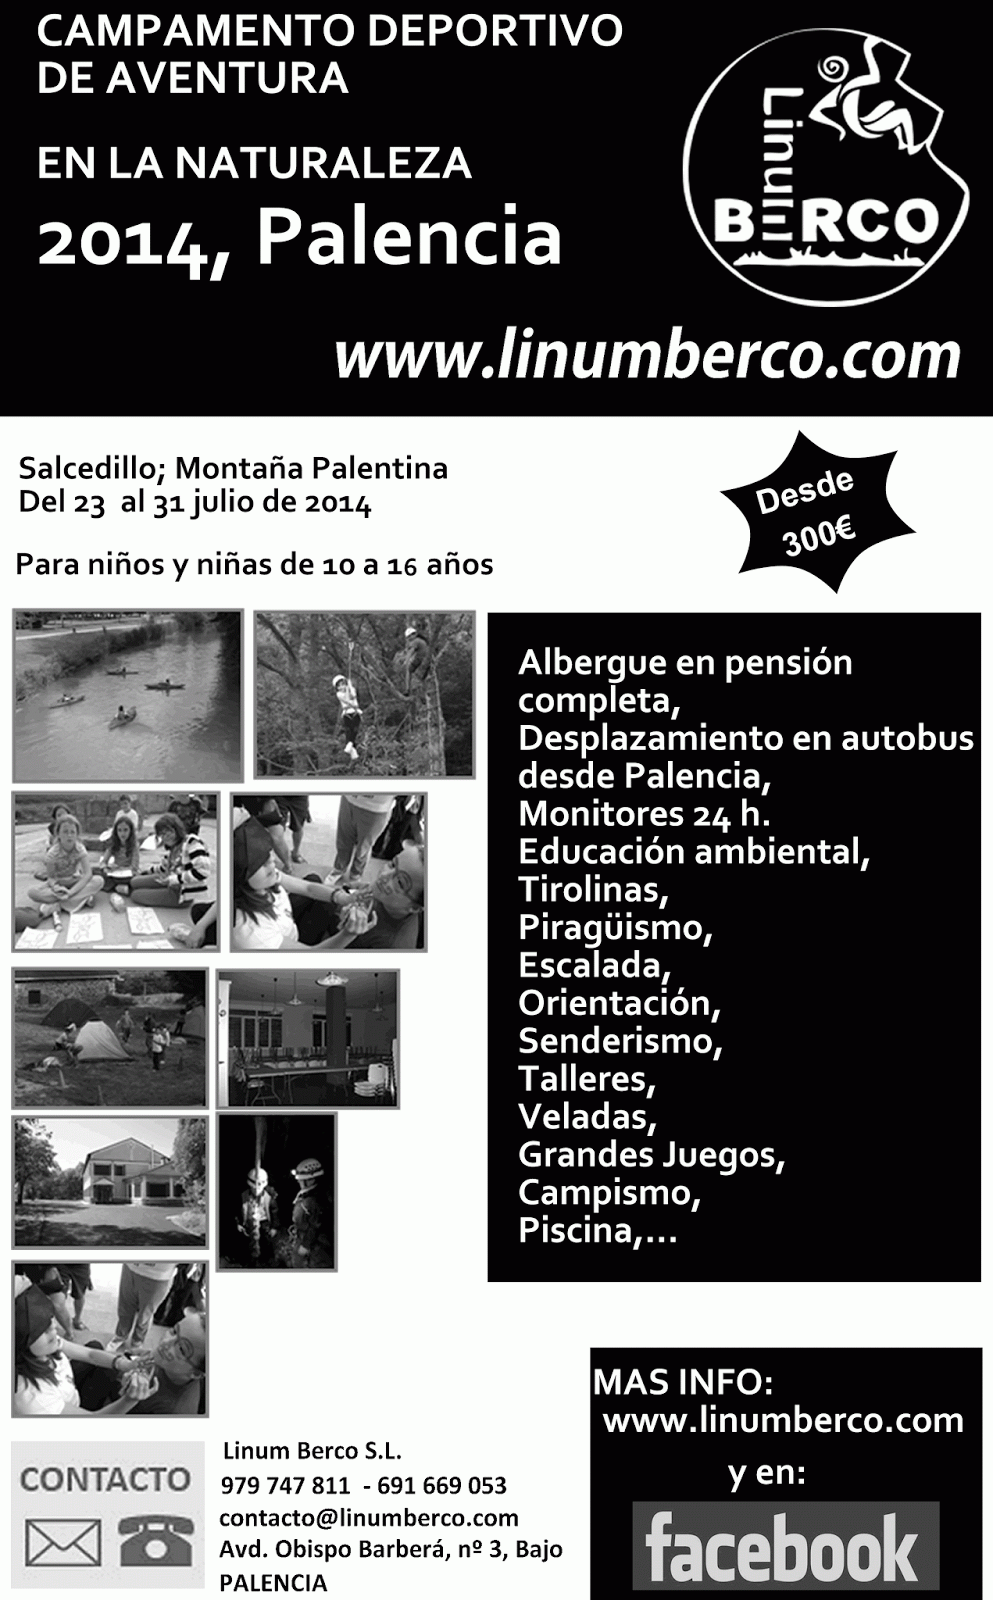 http://www.linumberco.com/campamentos.php